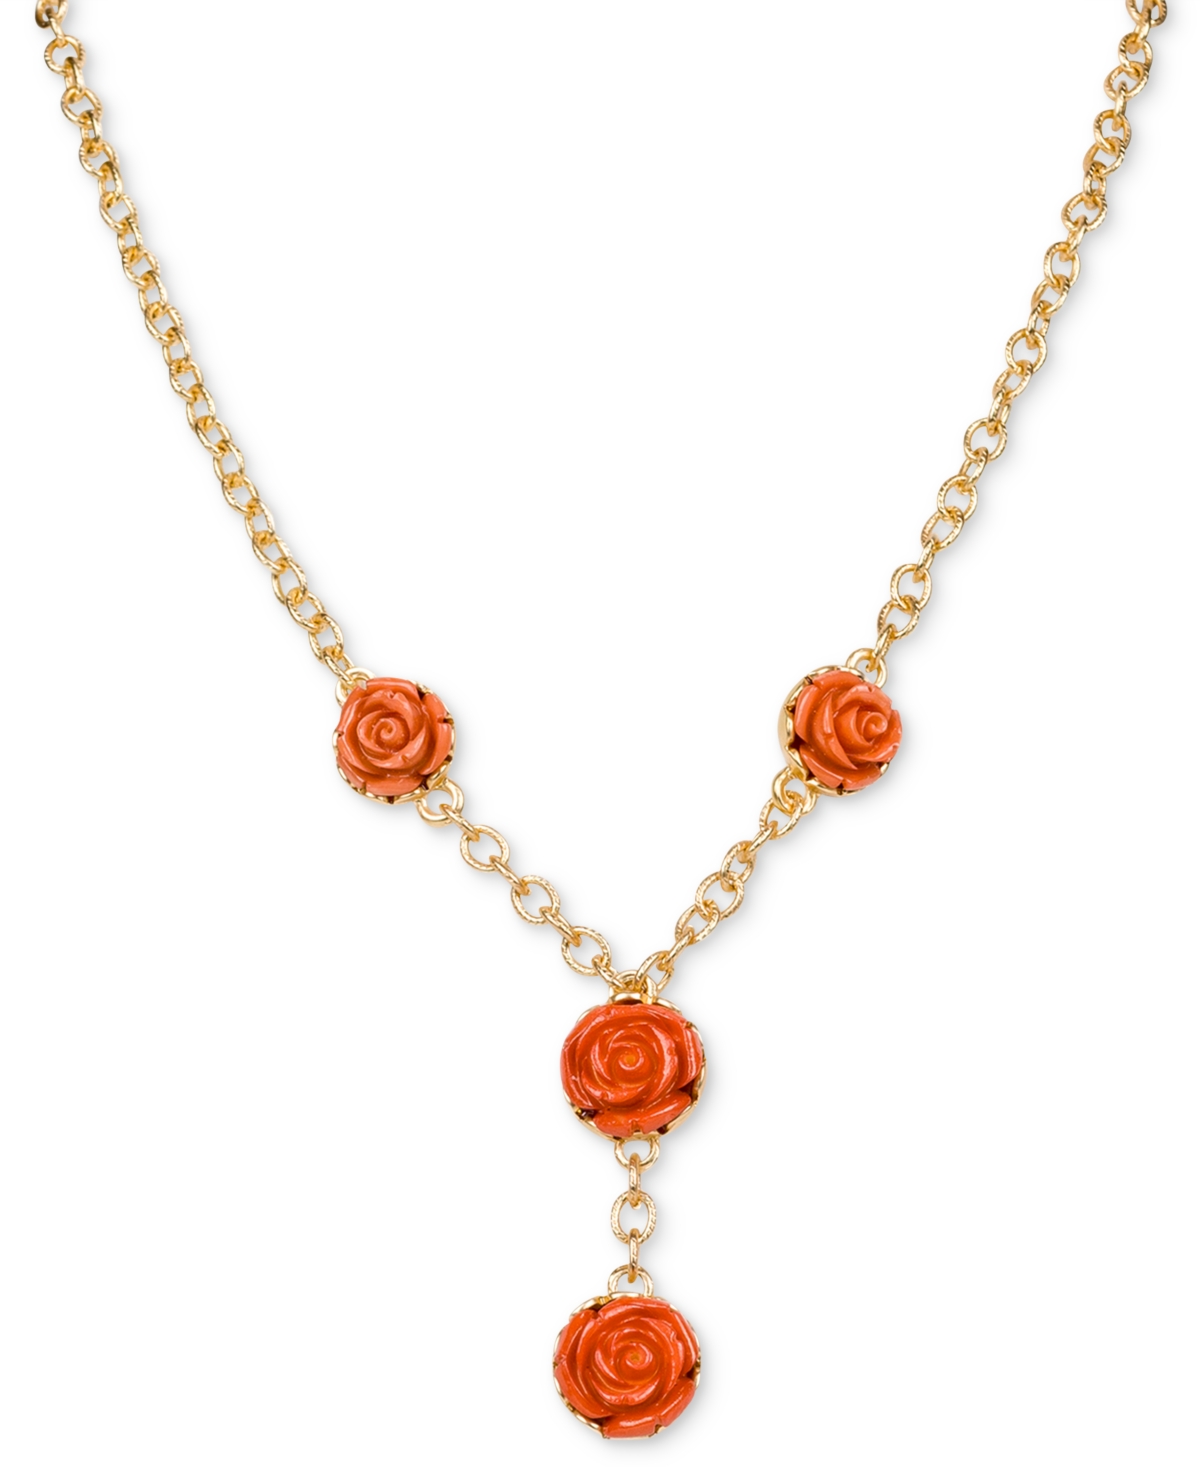 Patricia Nash Gold-tone Carved Rose Lariat Necklace, 18" + 3" Extender In Egyptian Gold,pink